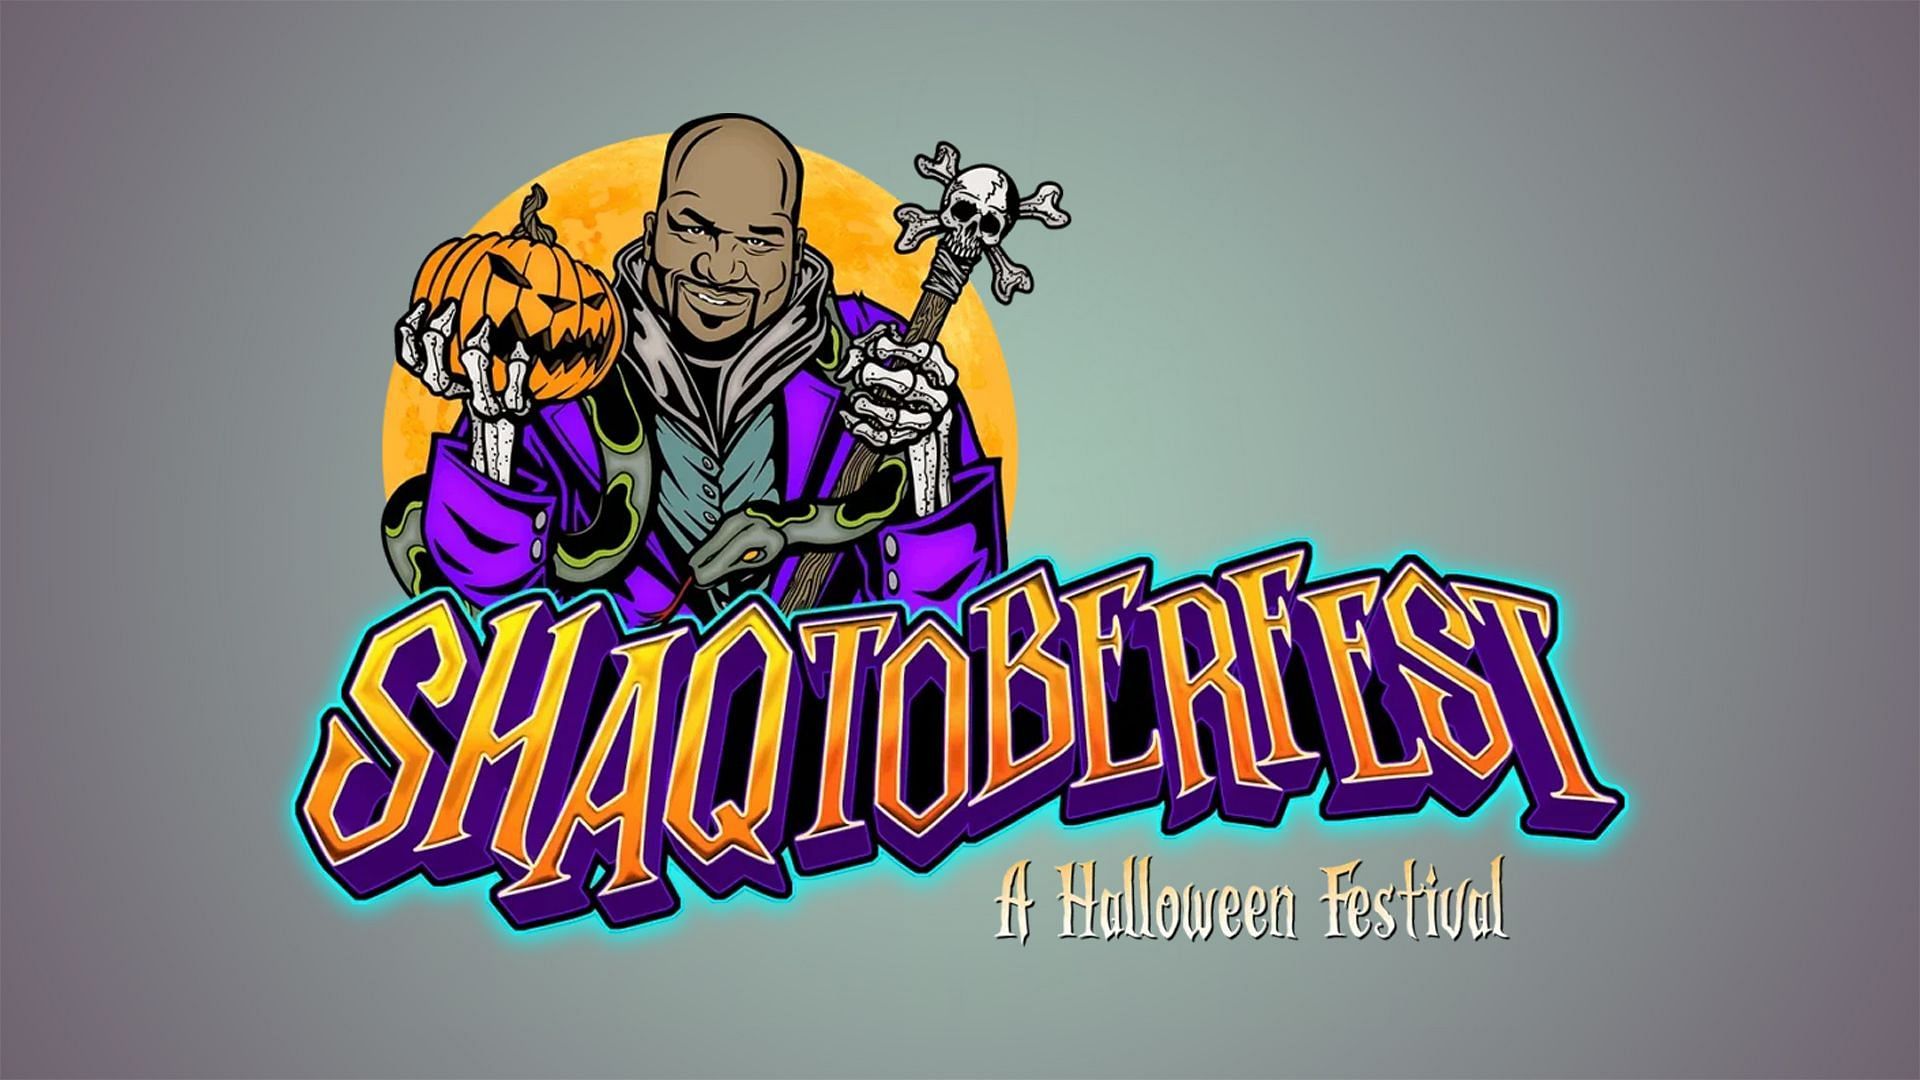 What is Shaqtoberfest? Here are all the details that you need to know